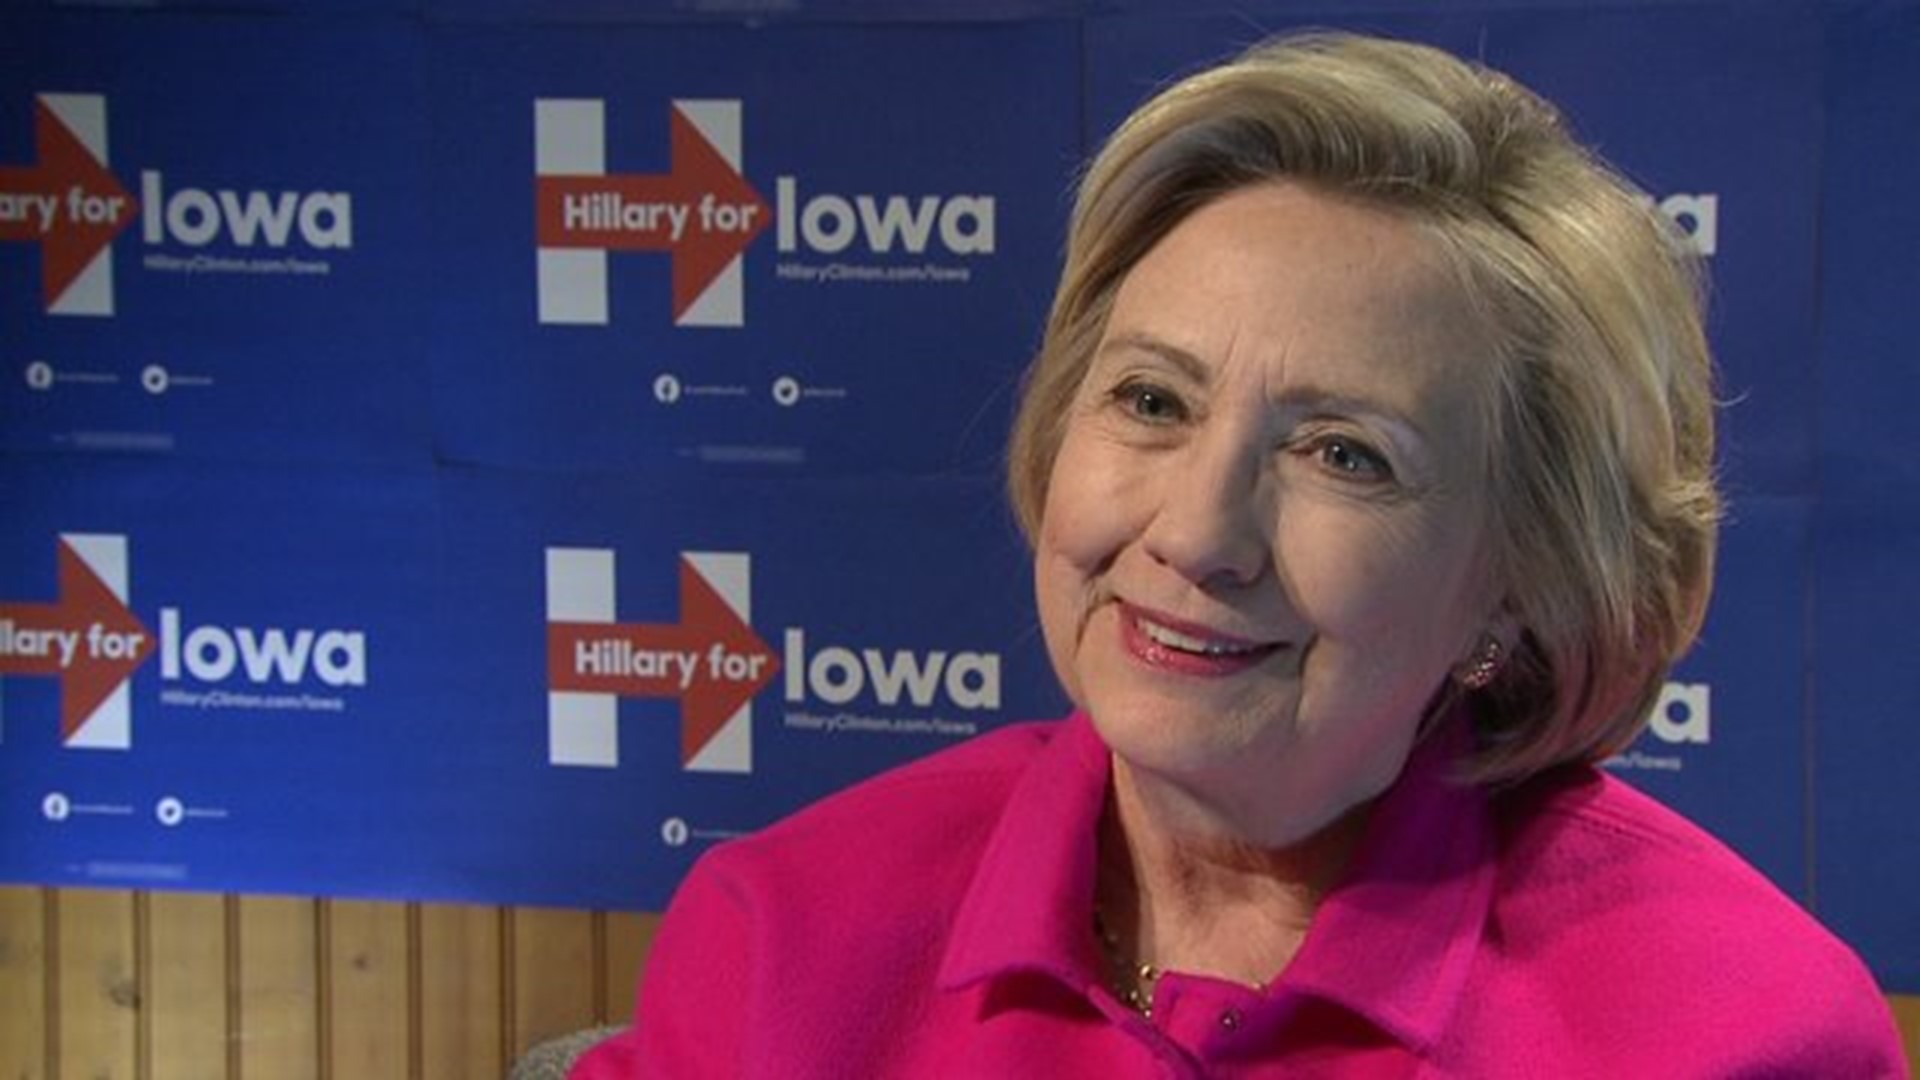 WQAD EXCLUSIVE: Hillary Clinton part 2 of 2